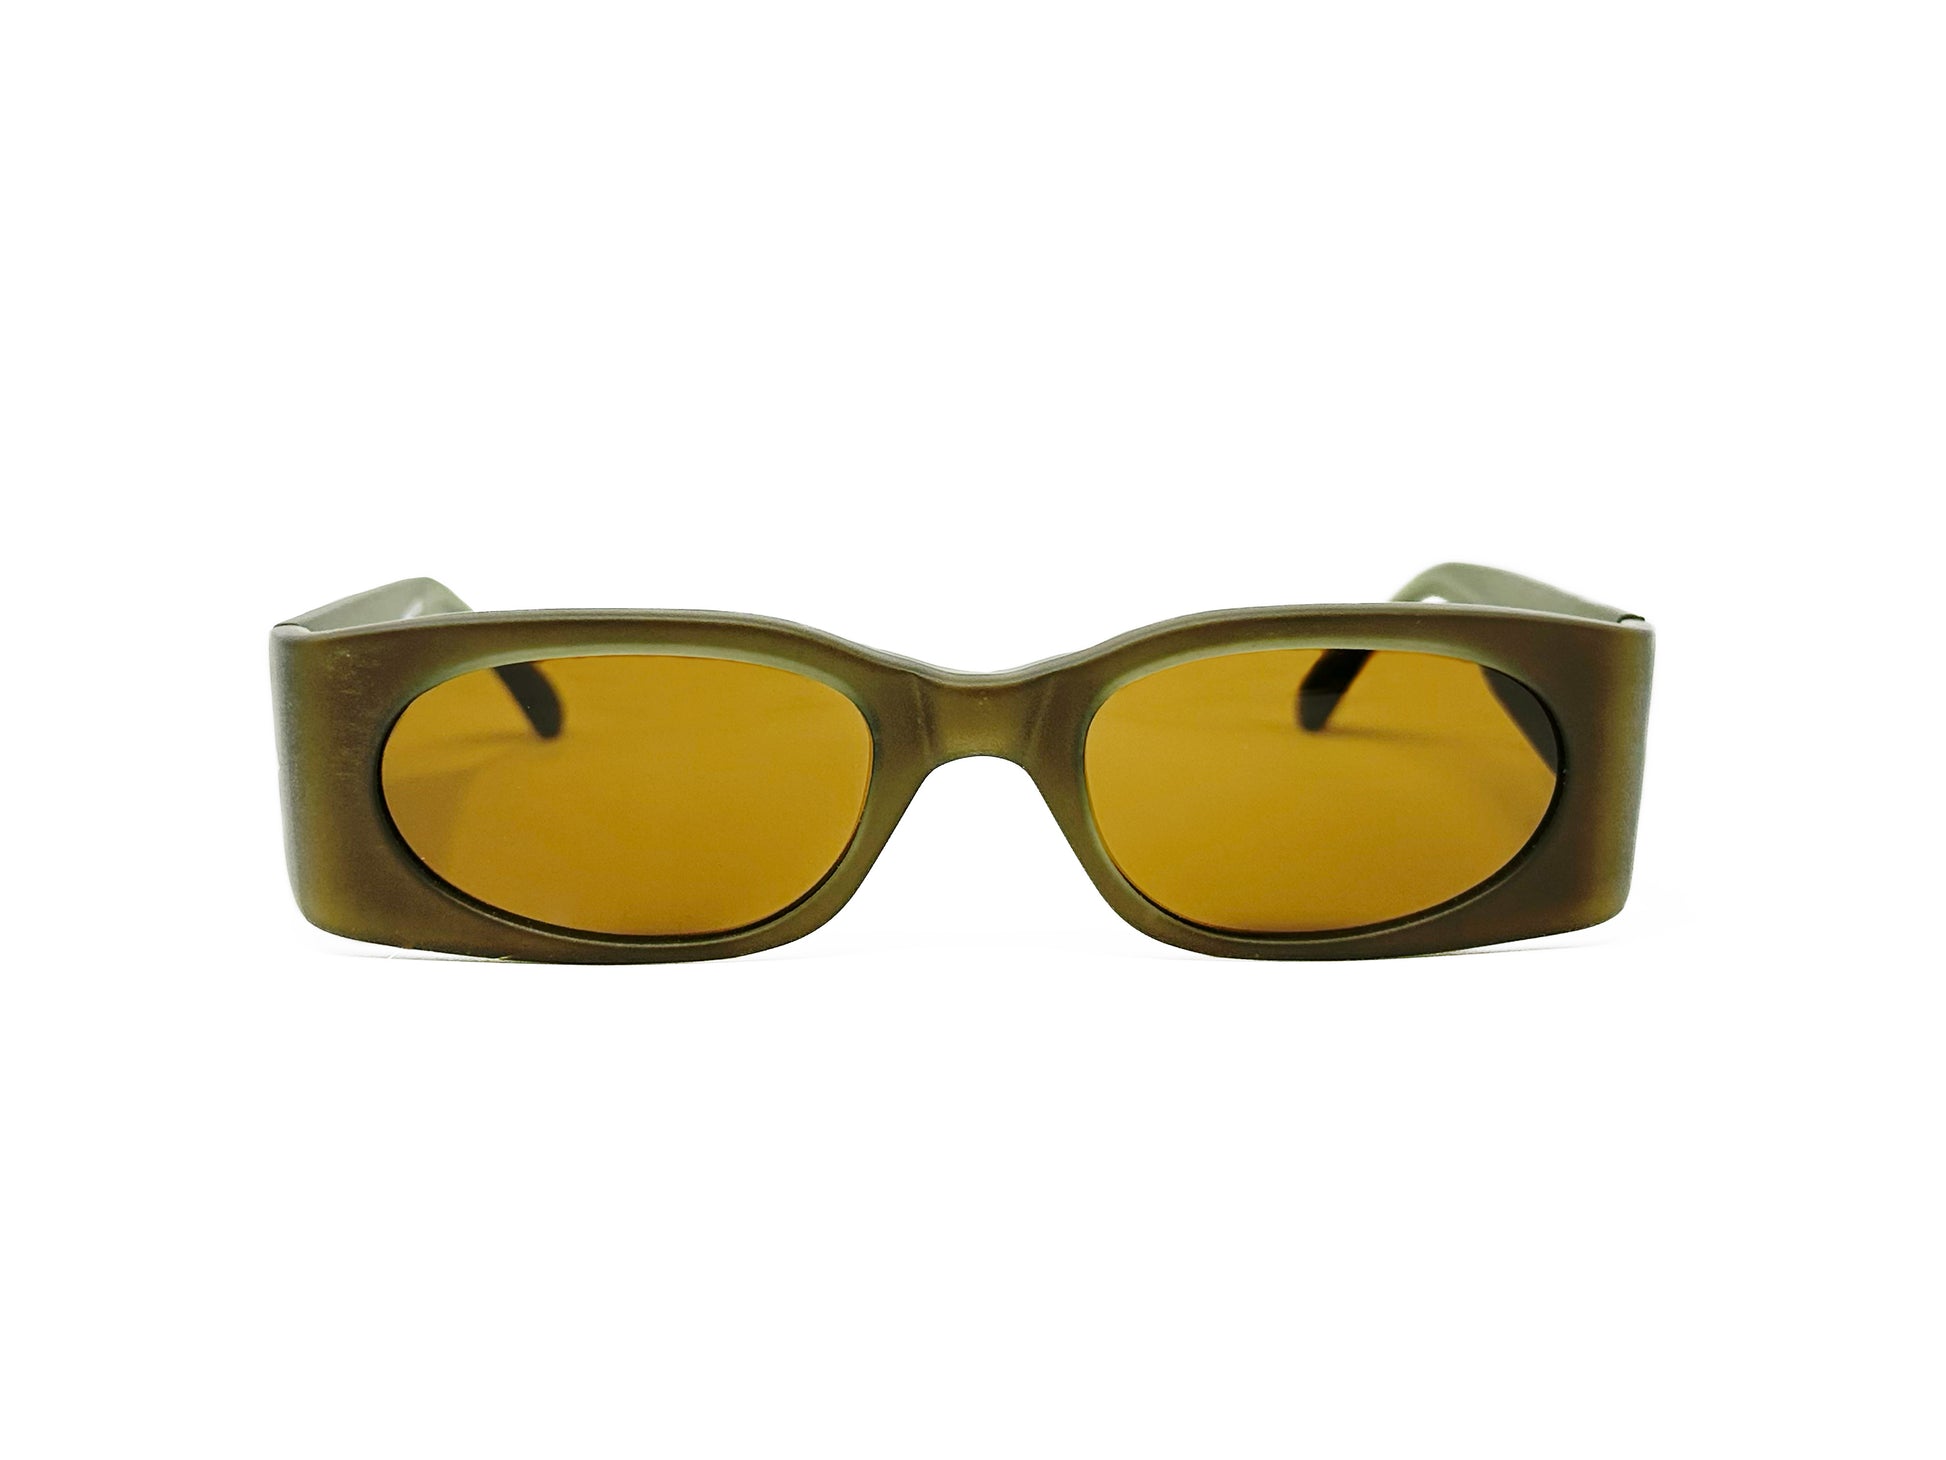 Kador rectangular acetate sunglasses with oval lenses. Model: DF2012. Color: M/1974 - Olive. Front view. 